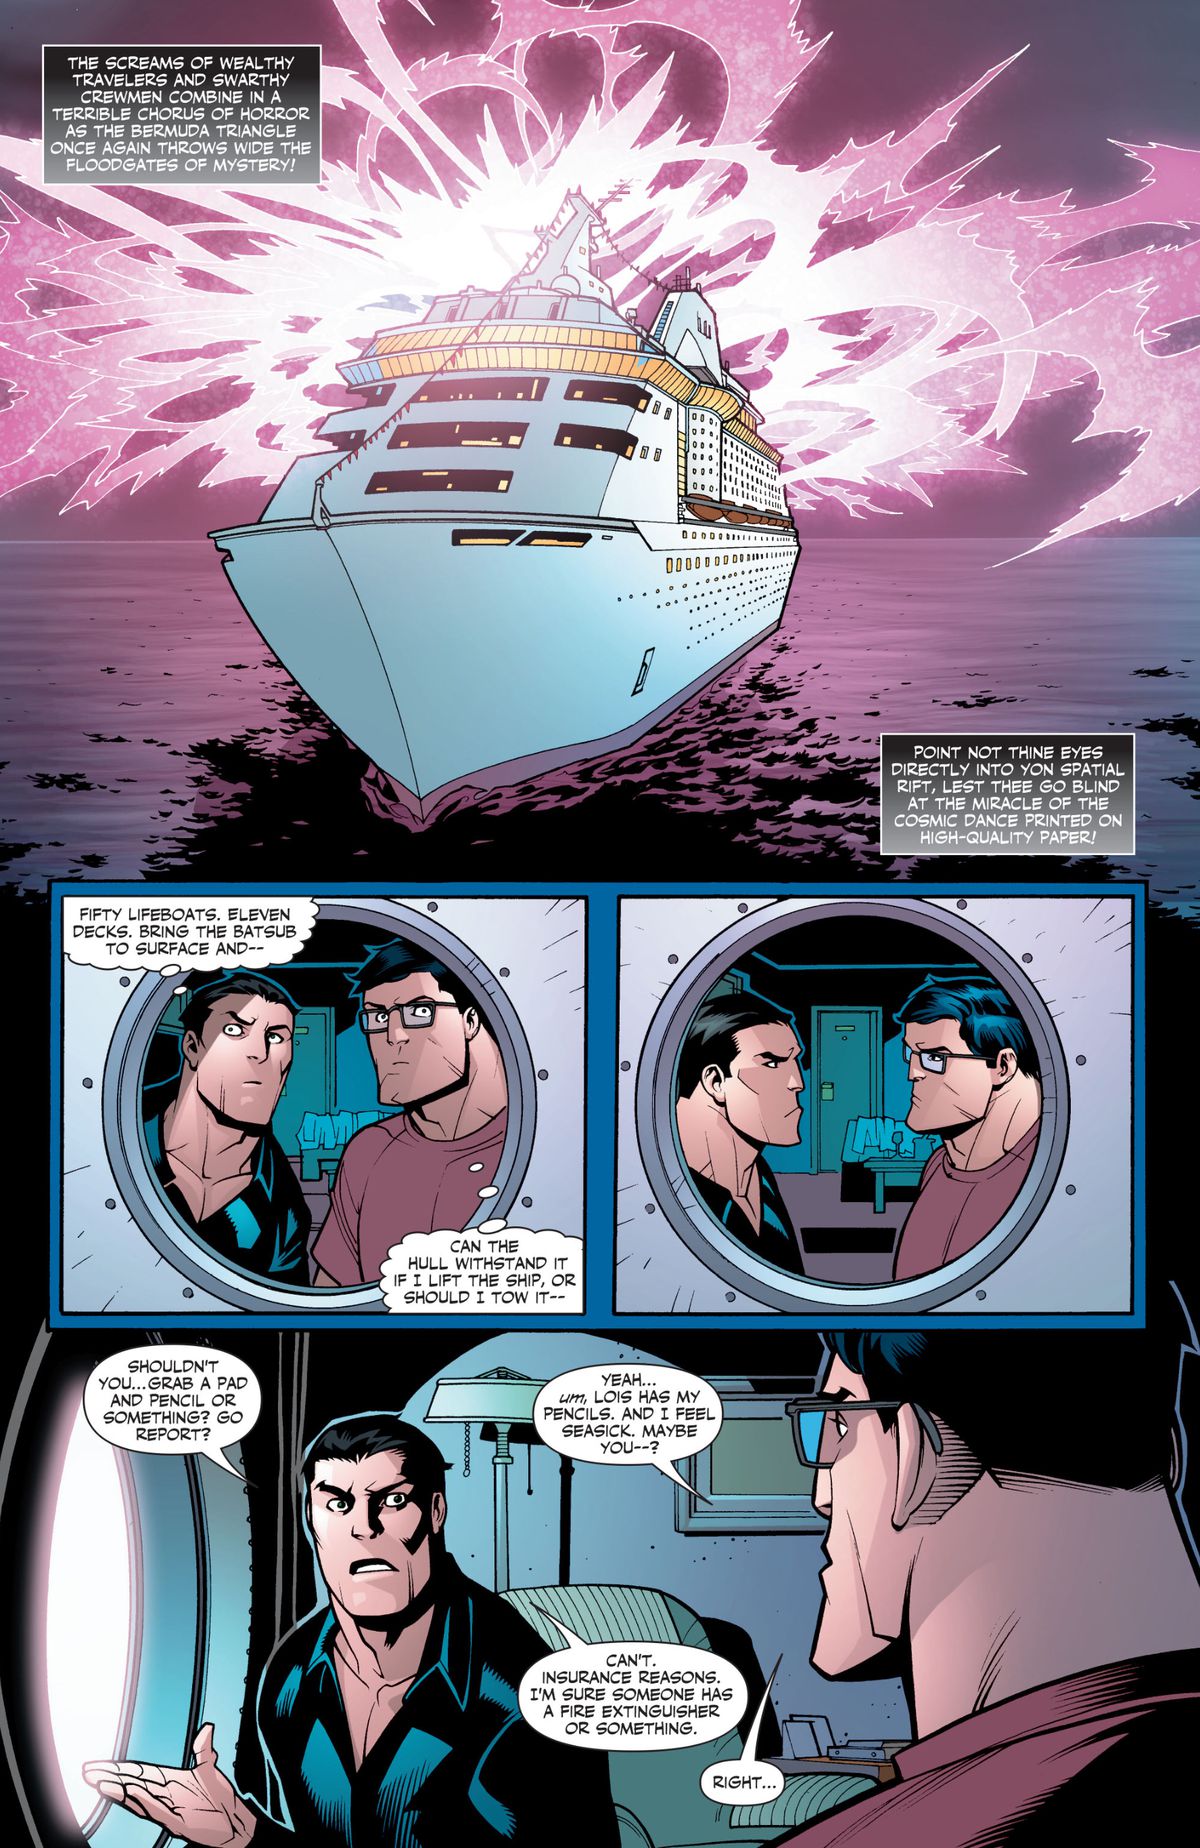 Disaster strikes on a cruise ship, as Bruce Wayne and Clark Kent internally plan how to save the day, and then each try to insist the other leave the room, so they can preserve their secret identities, in Superman/Batman Annual #1, DC Comics (2006).